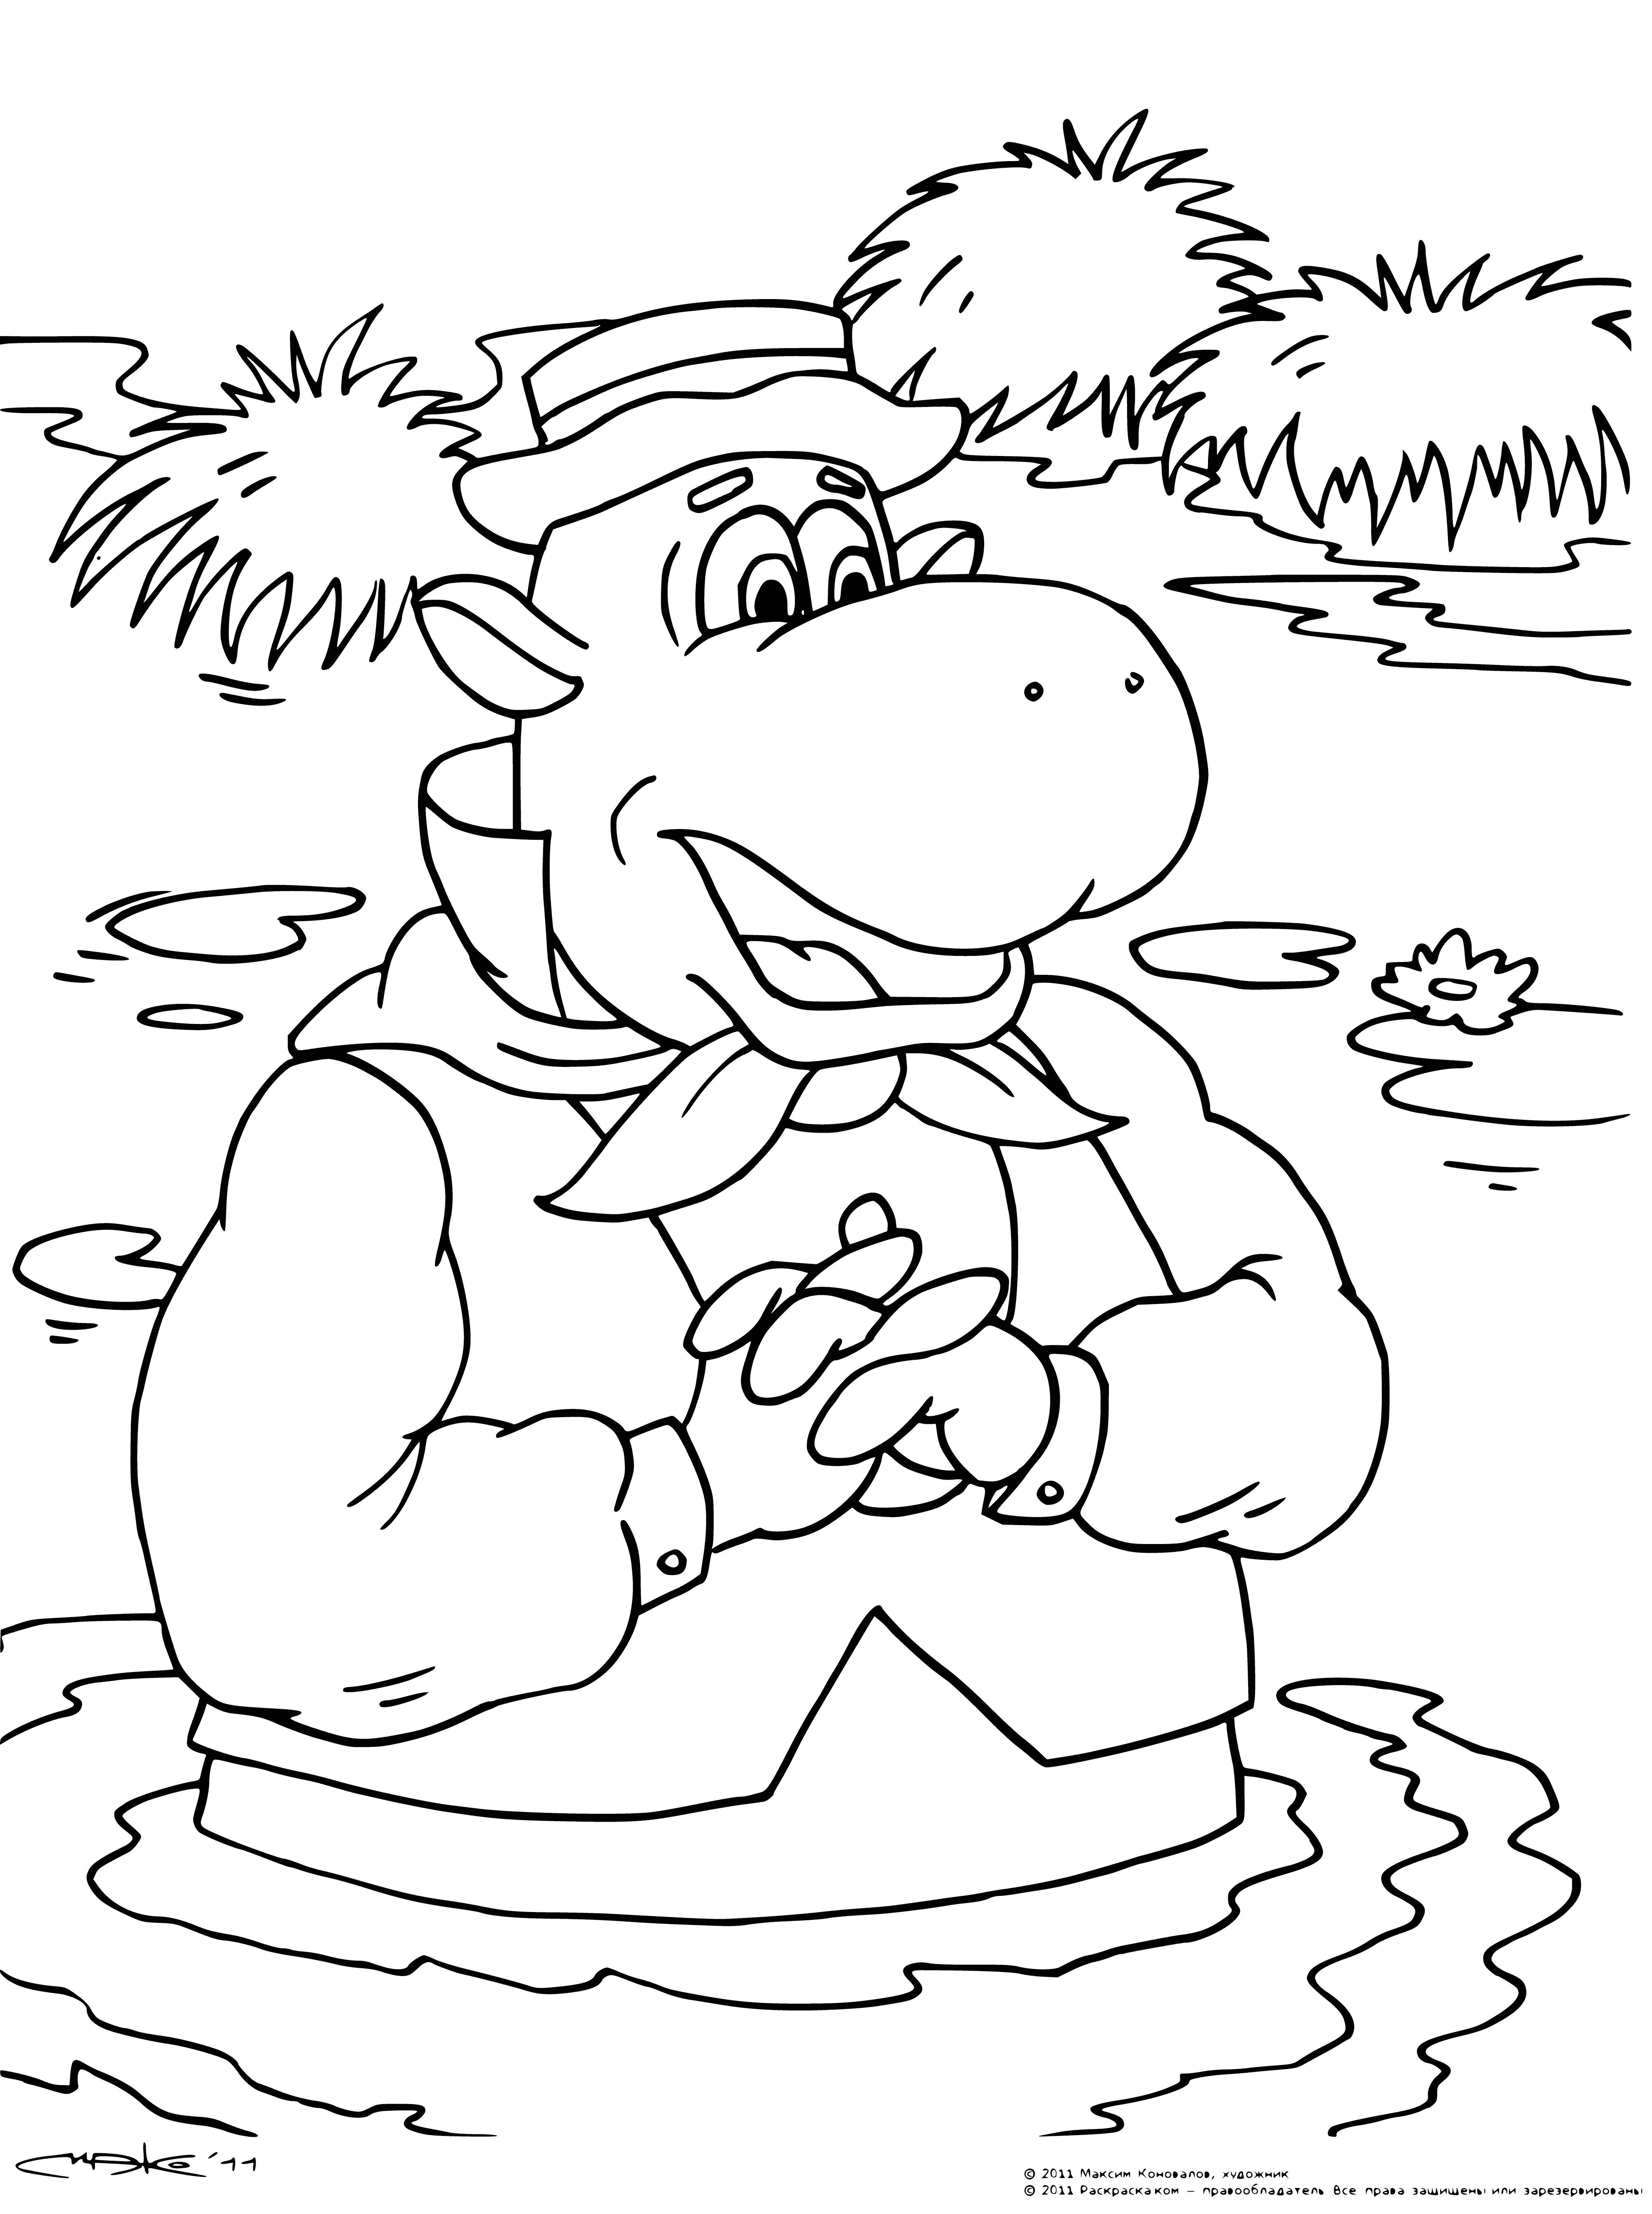 coloring page: Hippo stands in a river with big mouth/teeth, wrinkled skin, and short tail.